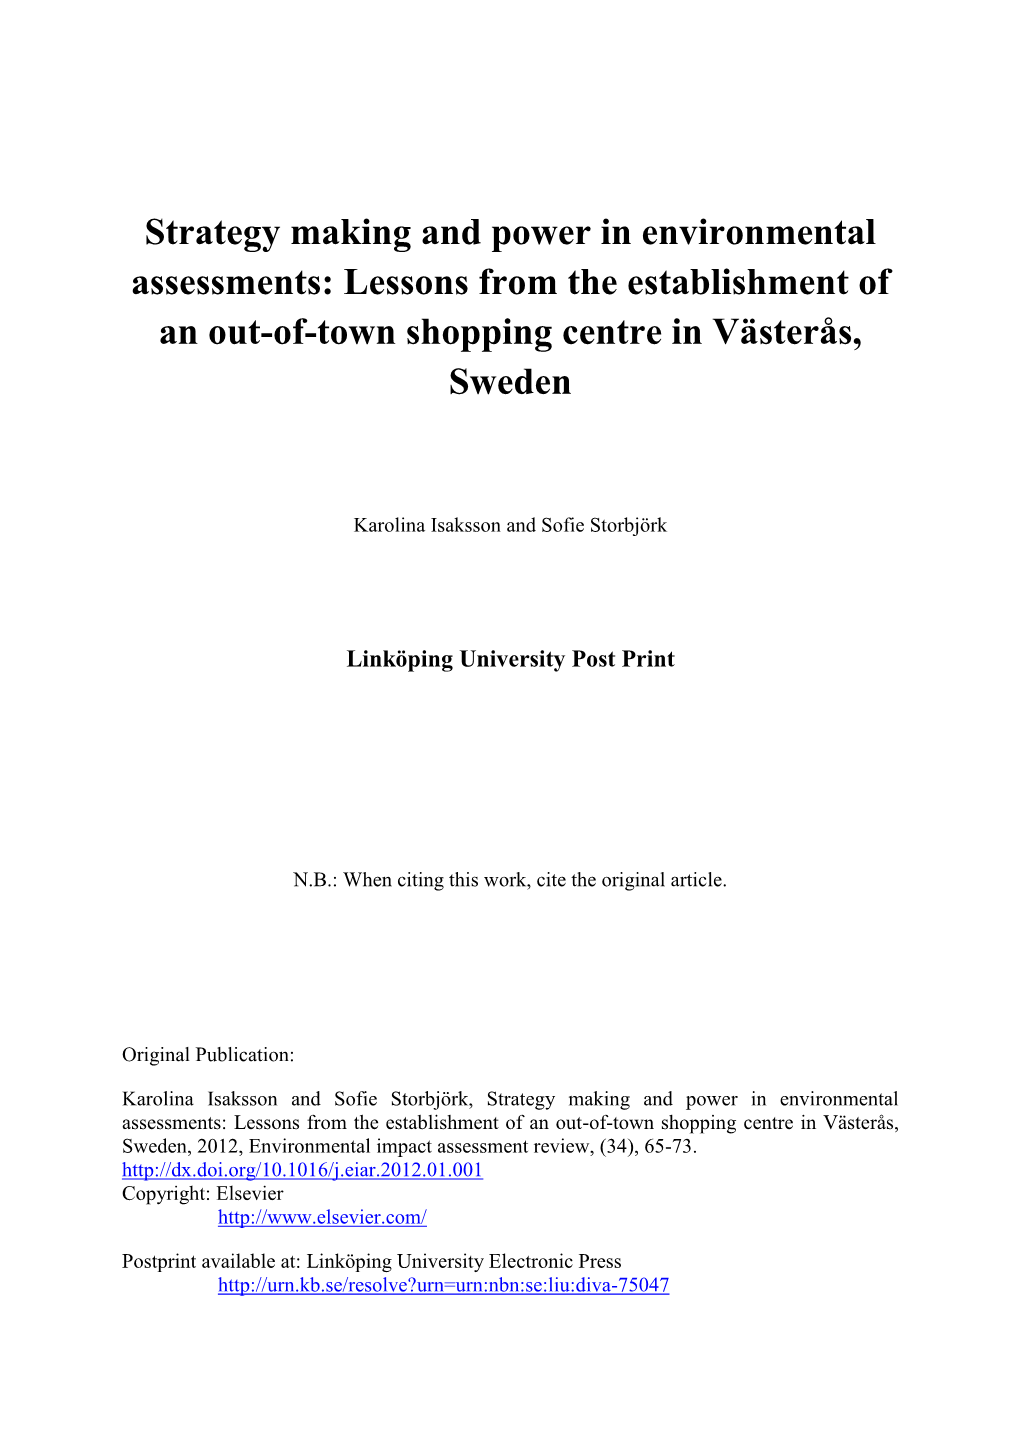 Strategy Making and Power in Environmental Assessments: Lessons from the Establishment of an Out-Of-Town Shopping Centre in Västerås, Sweden